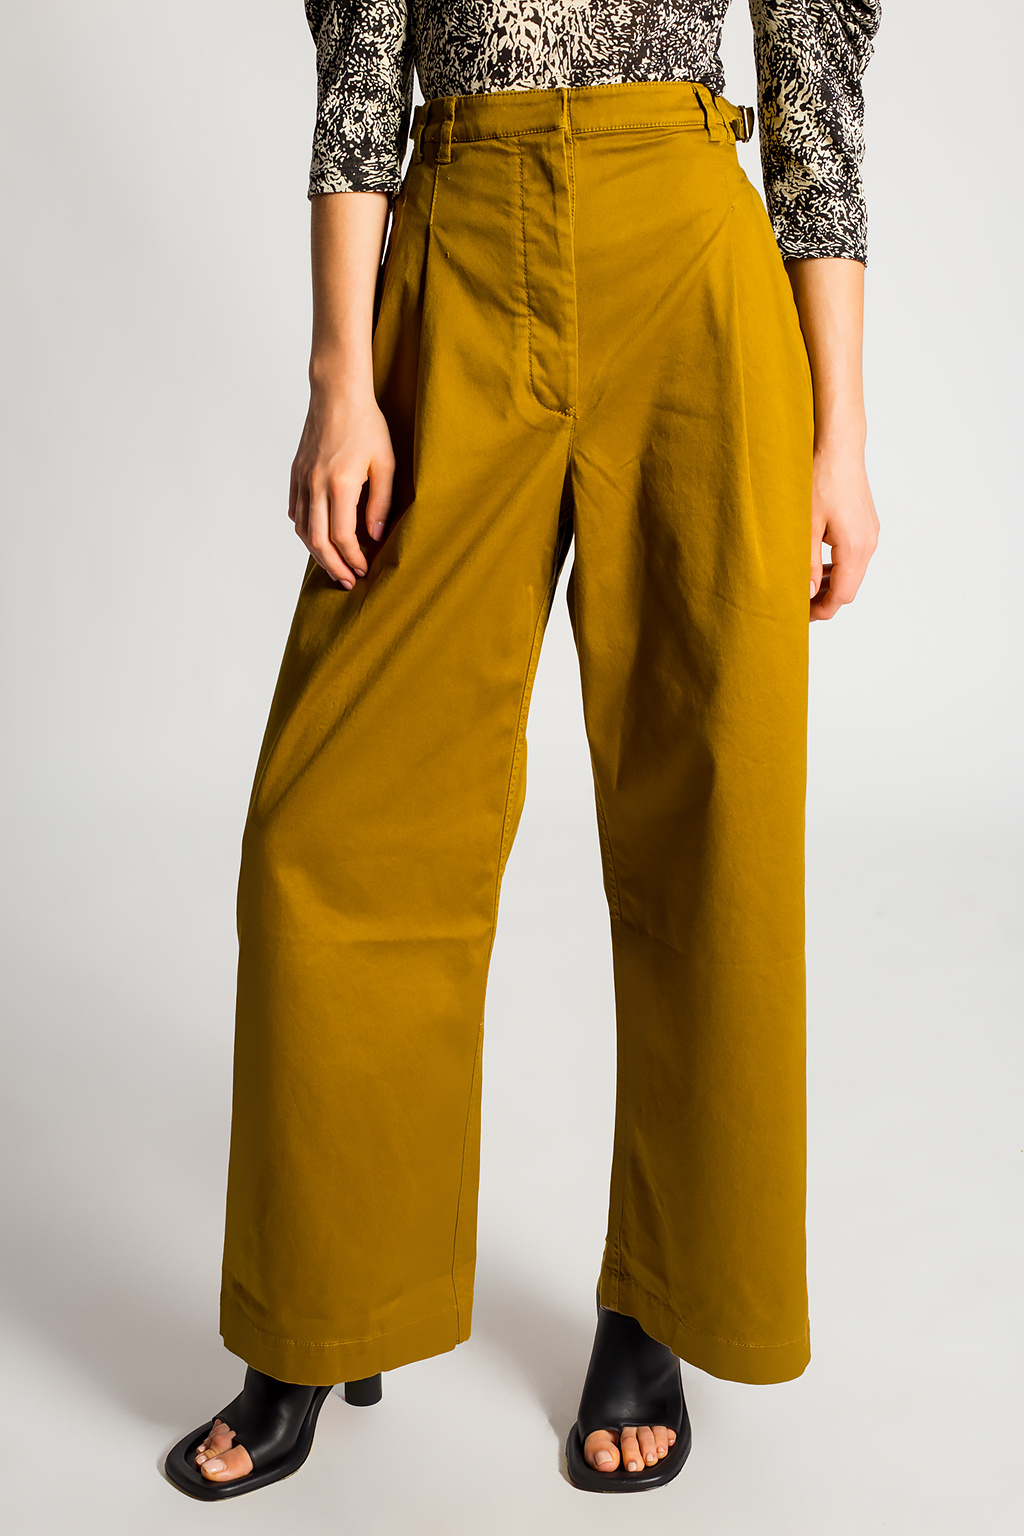 Ce sont des jeans traditionnels High-waisted trousers